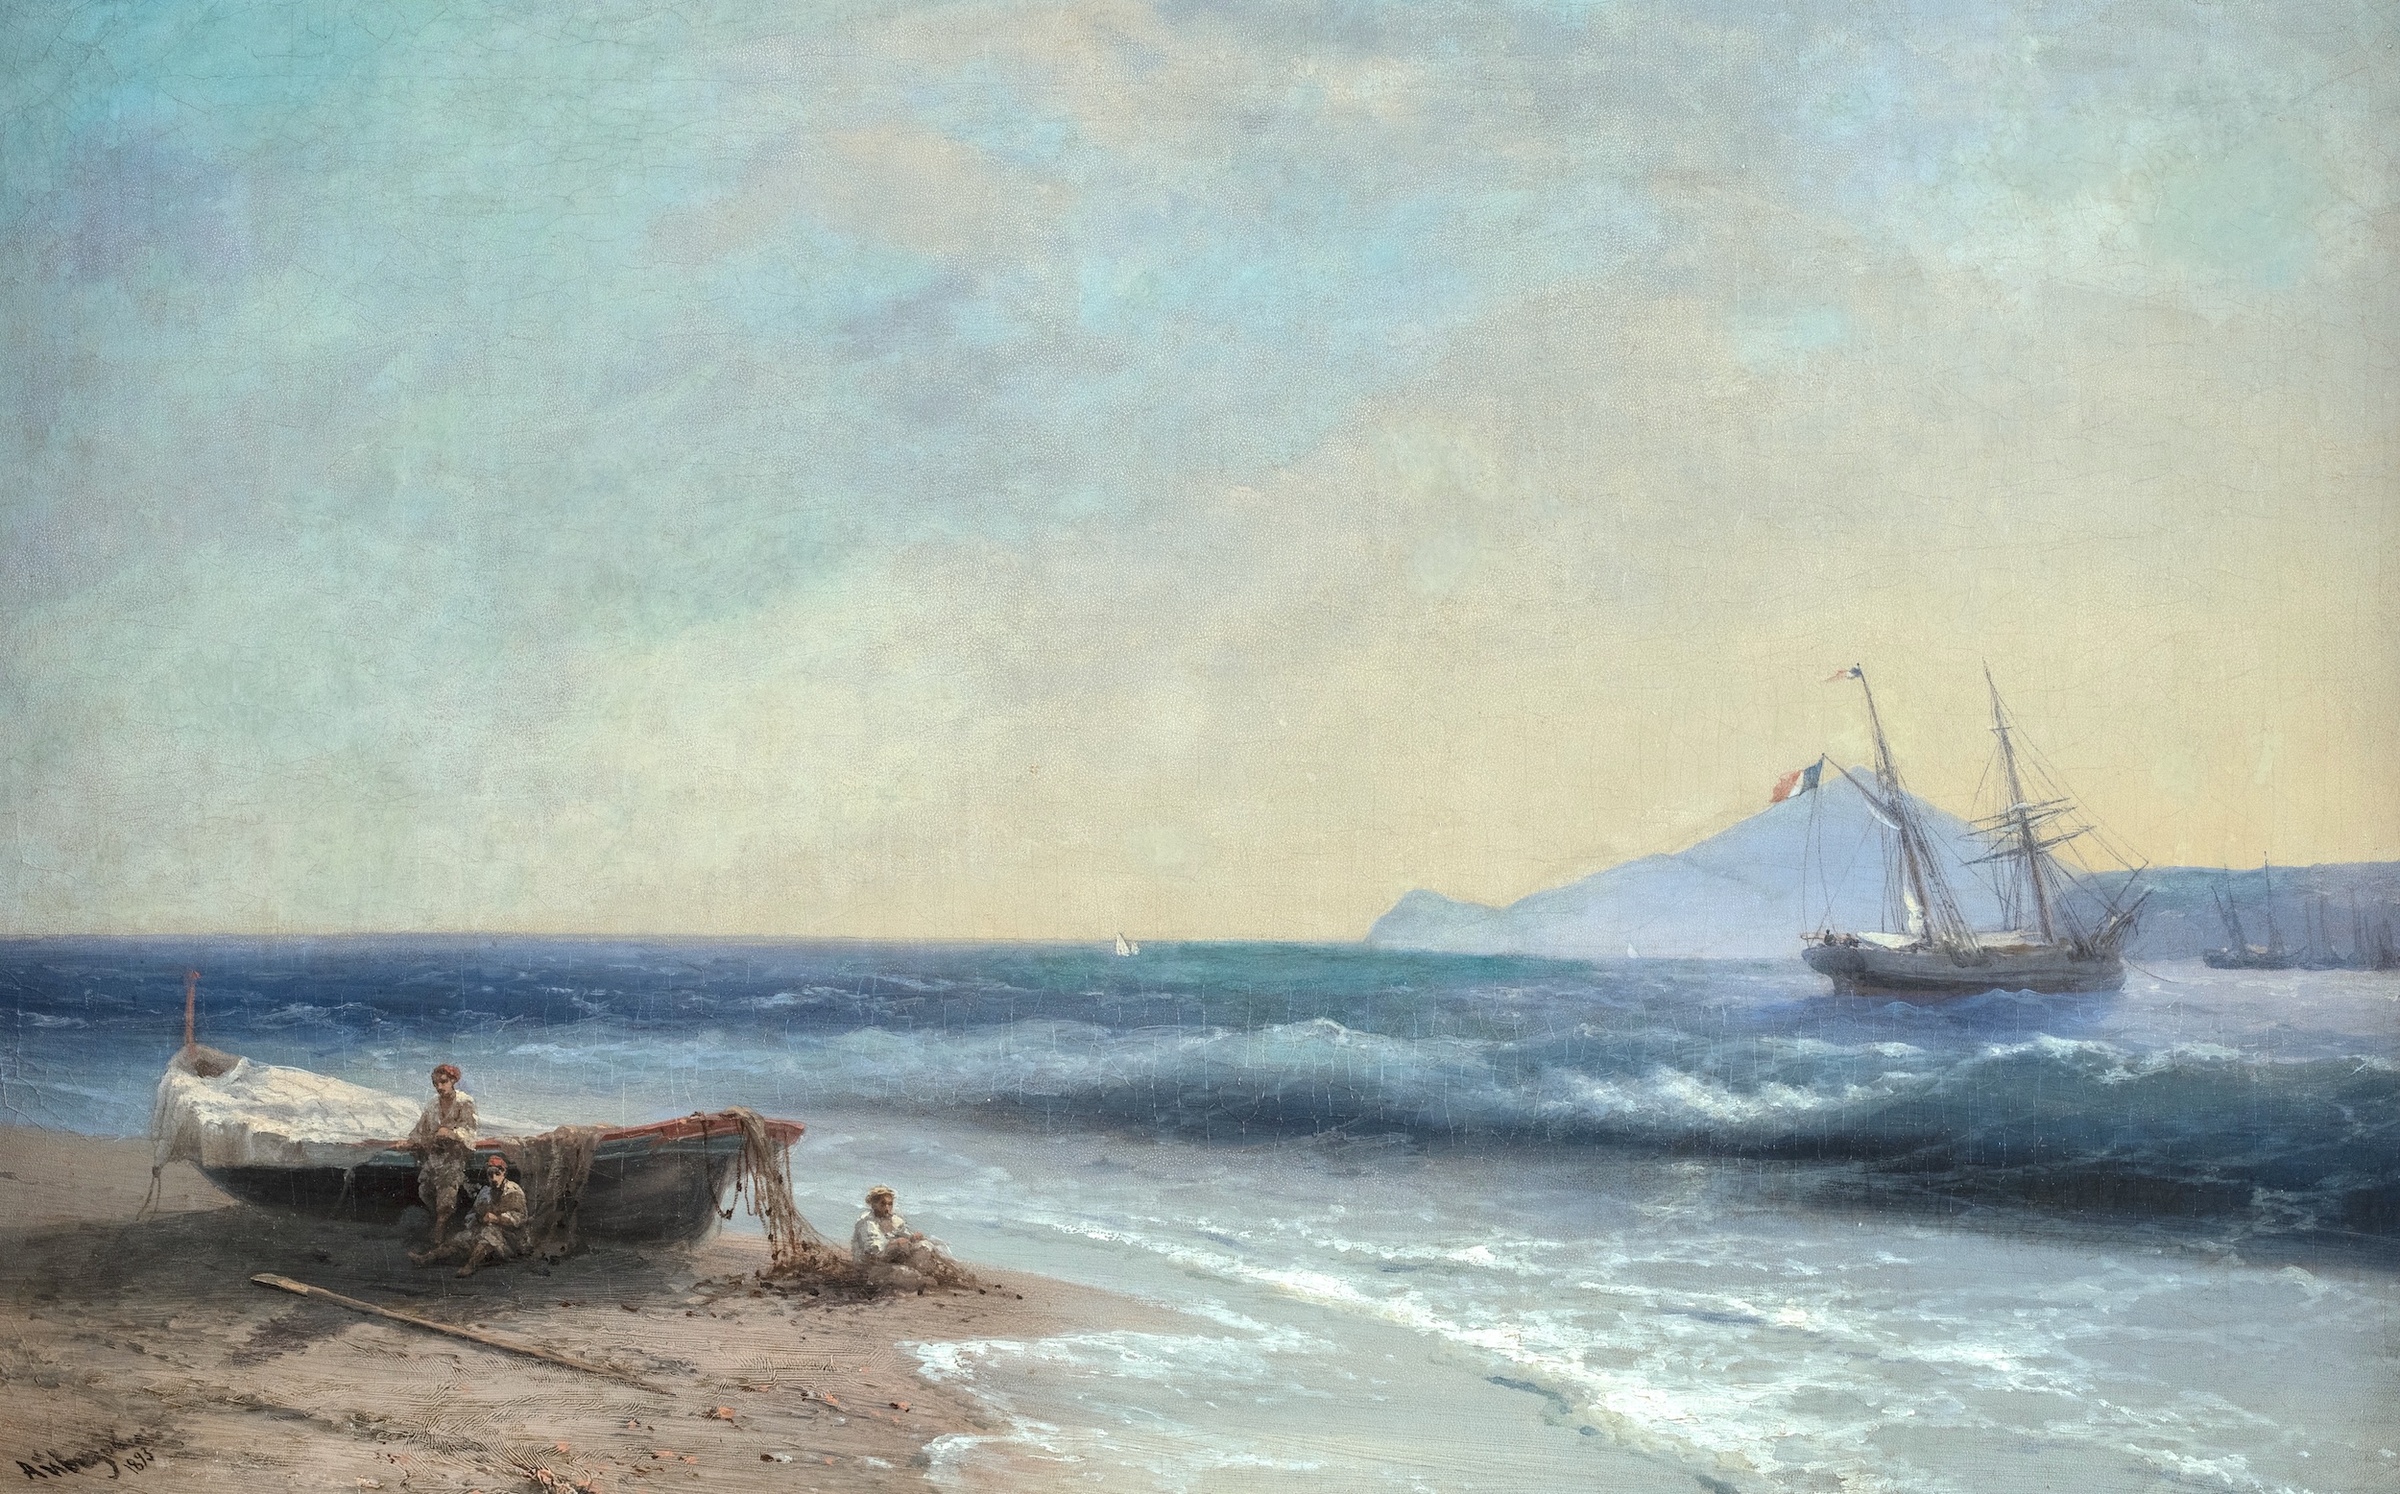 <a href='/en/catalogue/view?id=16071'>Lot</a> AIVAZOVSKY, IVAN, <i>Off the Southern Coast</i><br> SOLD FOR 514,000 GBP.